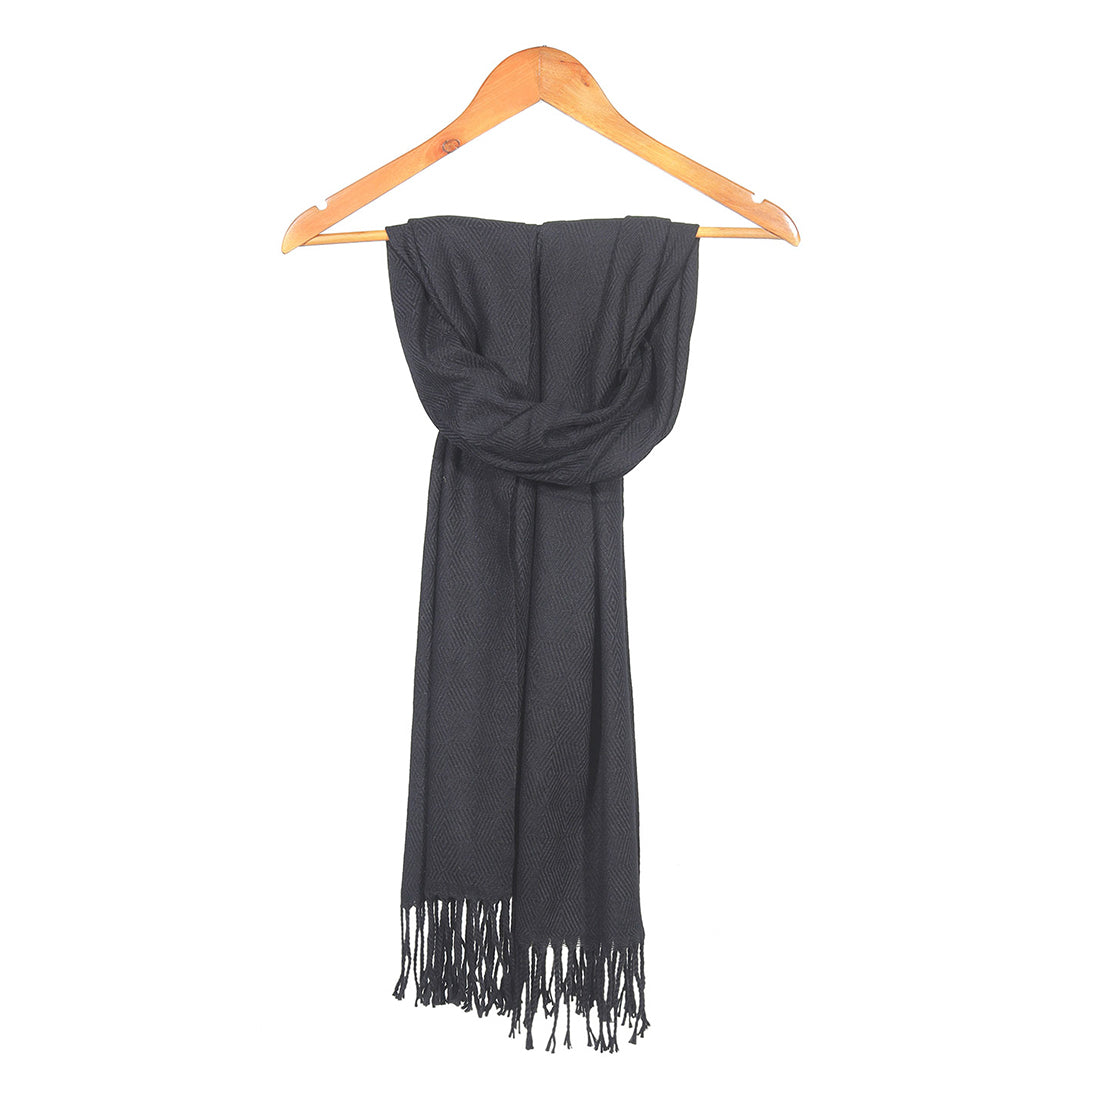 Black Acrylic Winter Scarf with Long Fringes